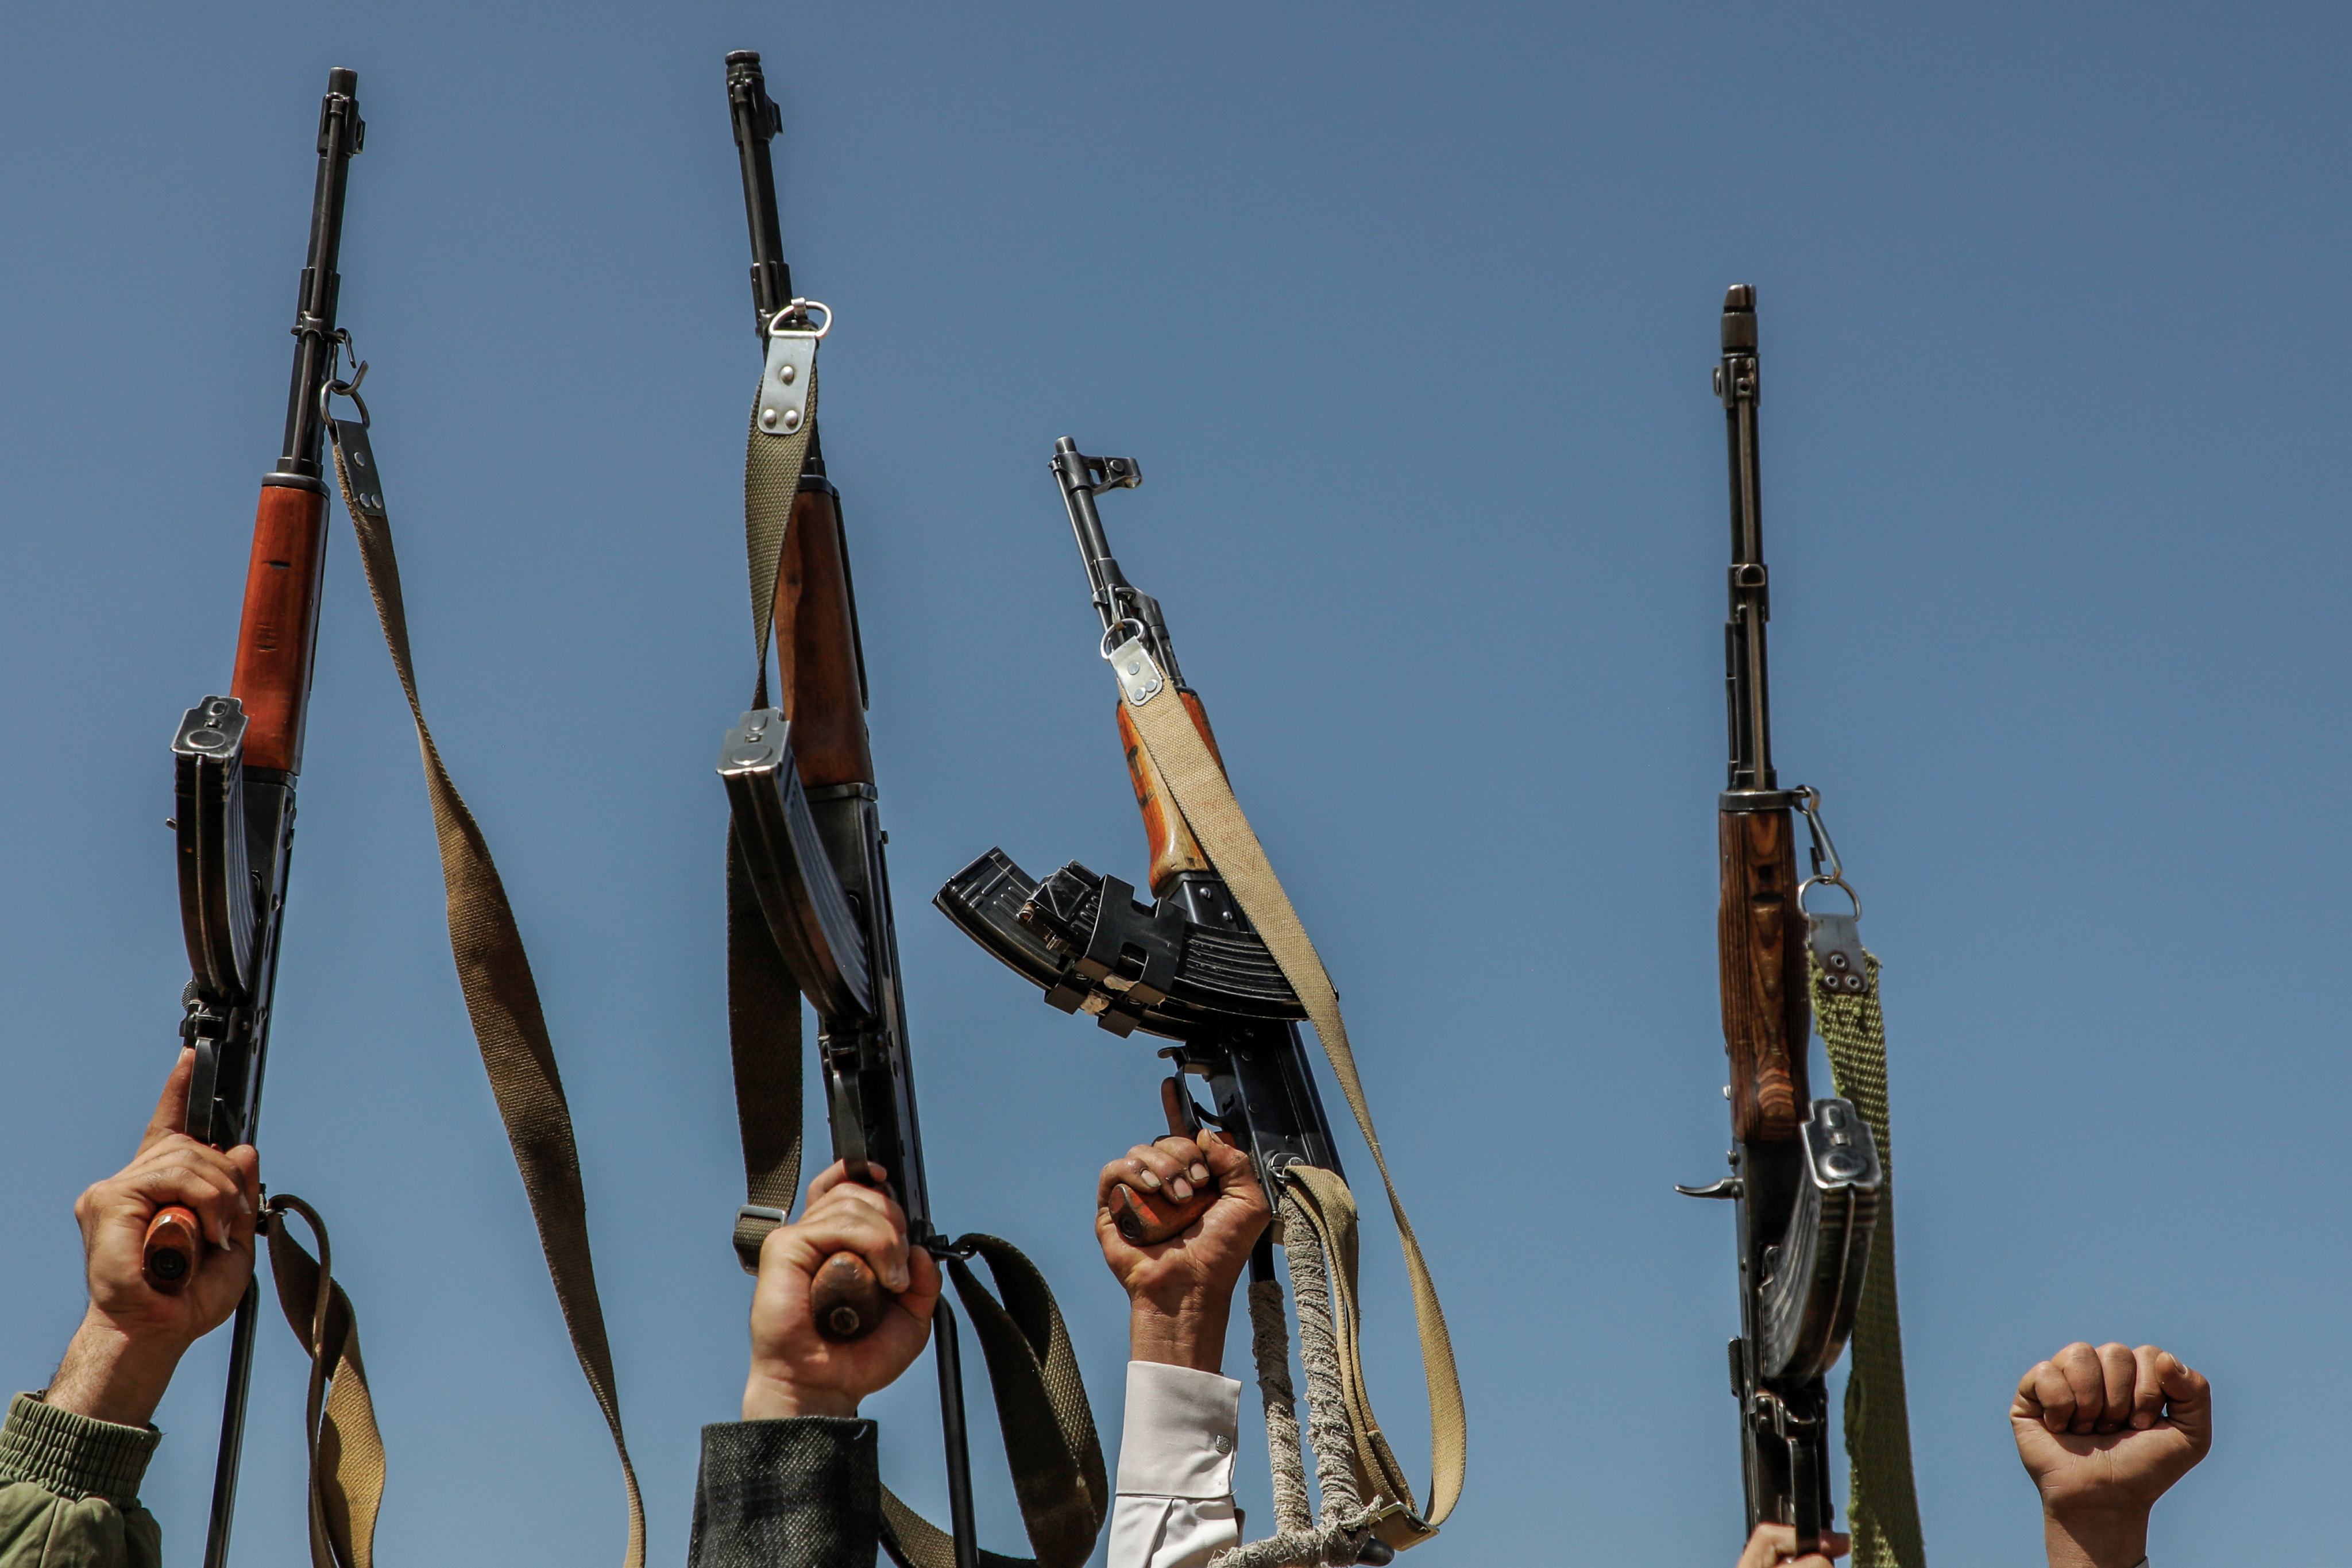 Armed Iran-backed Houthi rebels in Yemen. Iran has been a key player in several overlapping conflicts in the Middle East. Photo: dpa